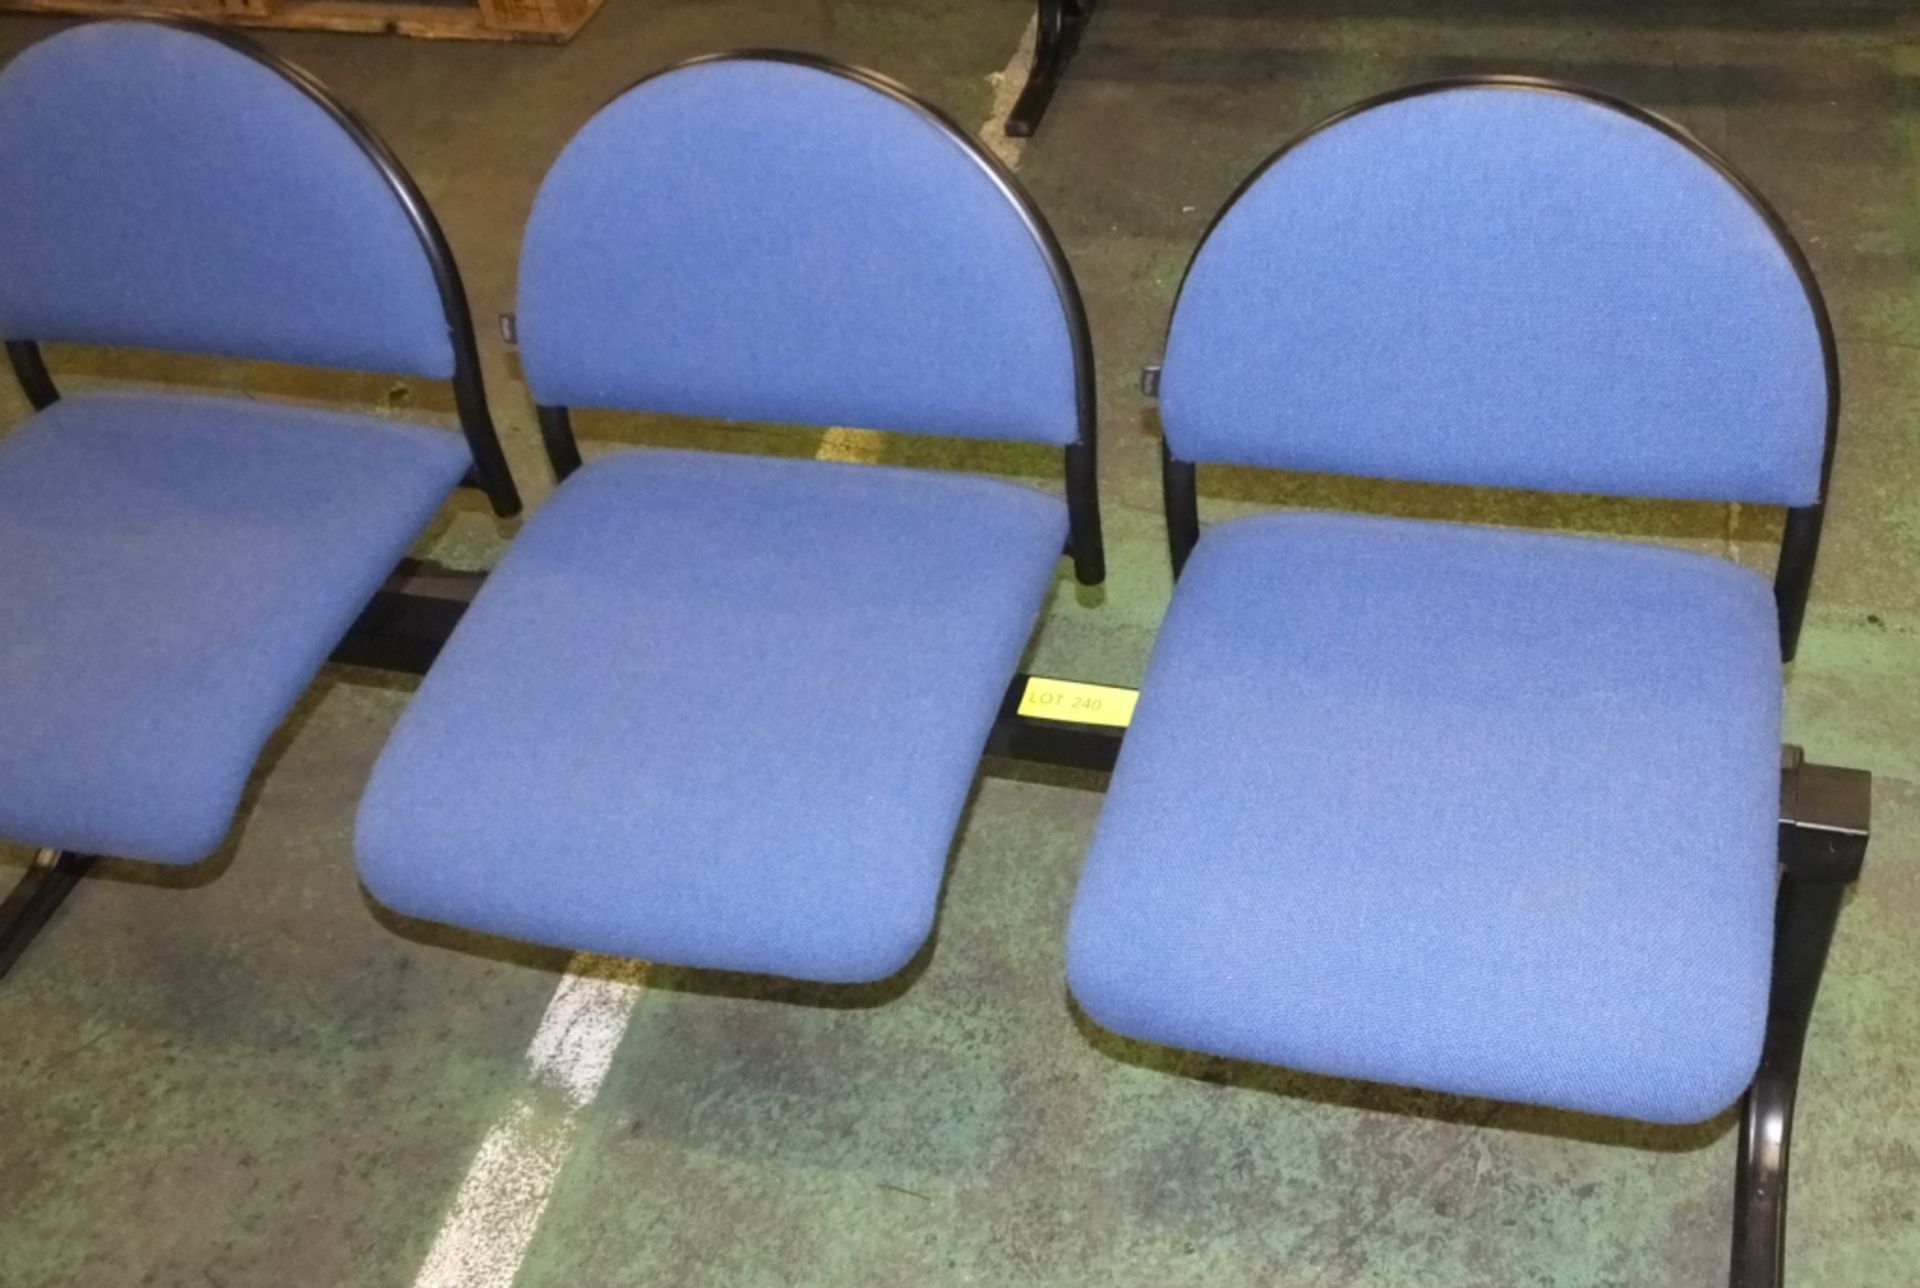 3 seater modular chair - blue chairs - Image 2 of 2